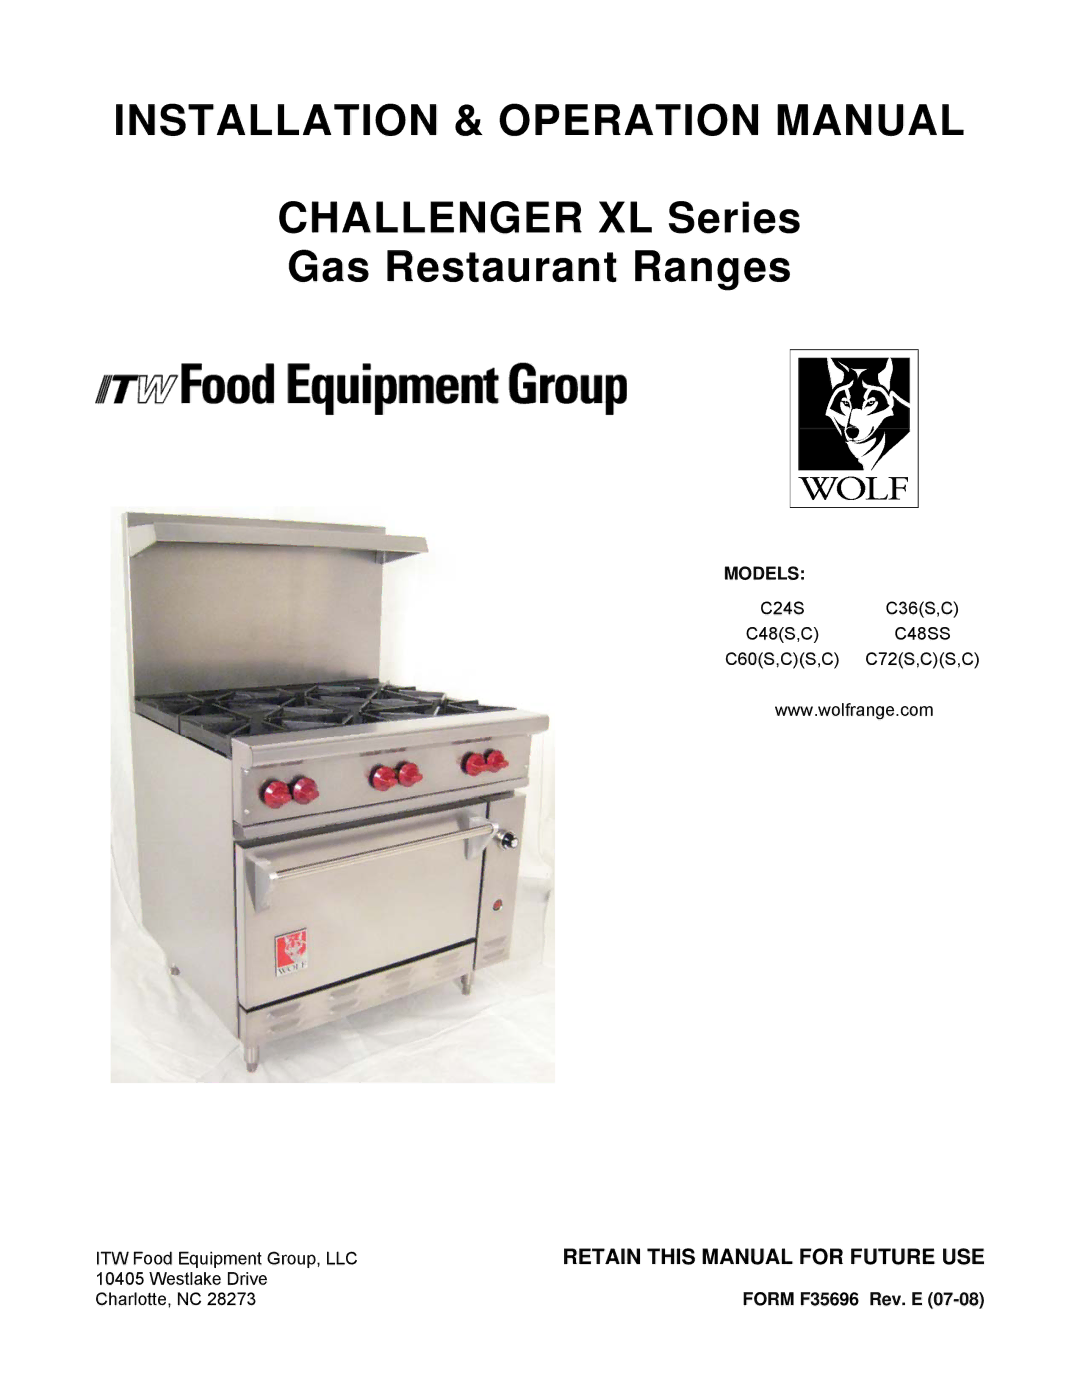 Wolf C72(S, C)(S, C36(S, C24S operation manual Challenger XL Series Gas Restaurant Ranges, Retain this Manual for Future USE 